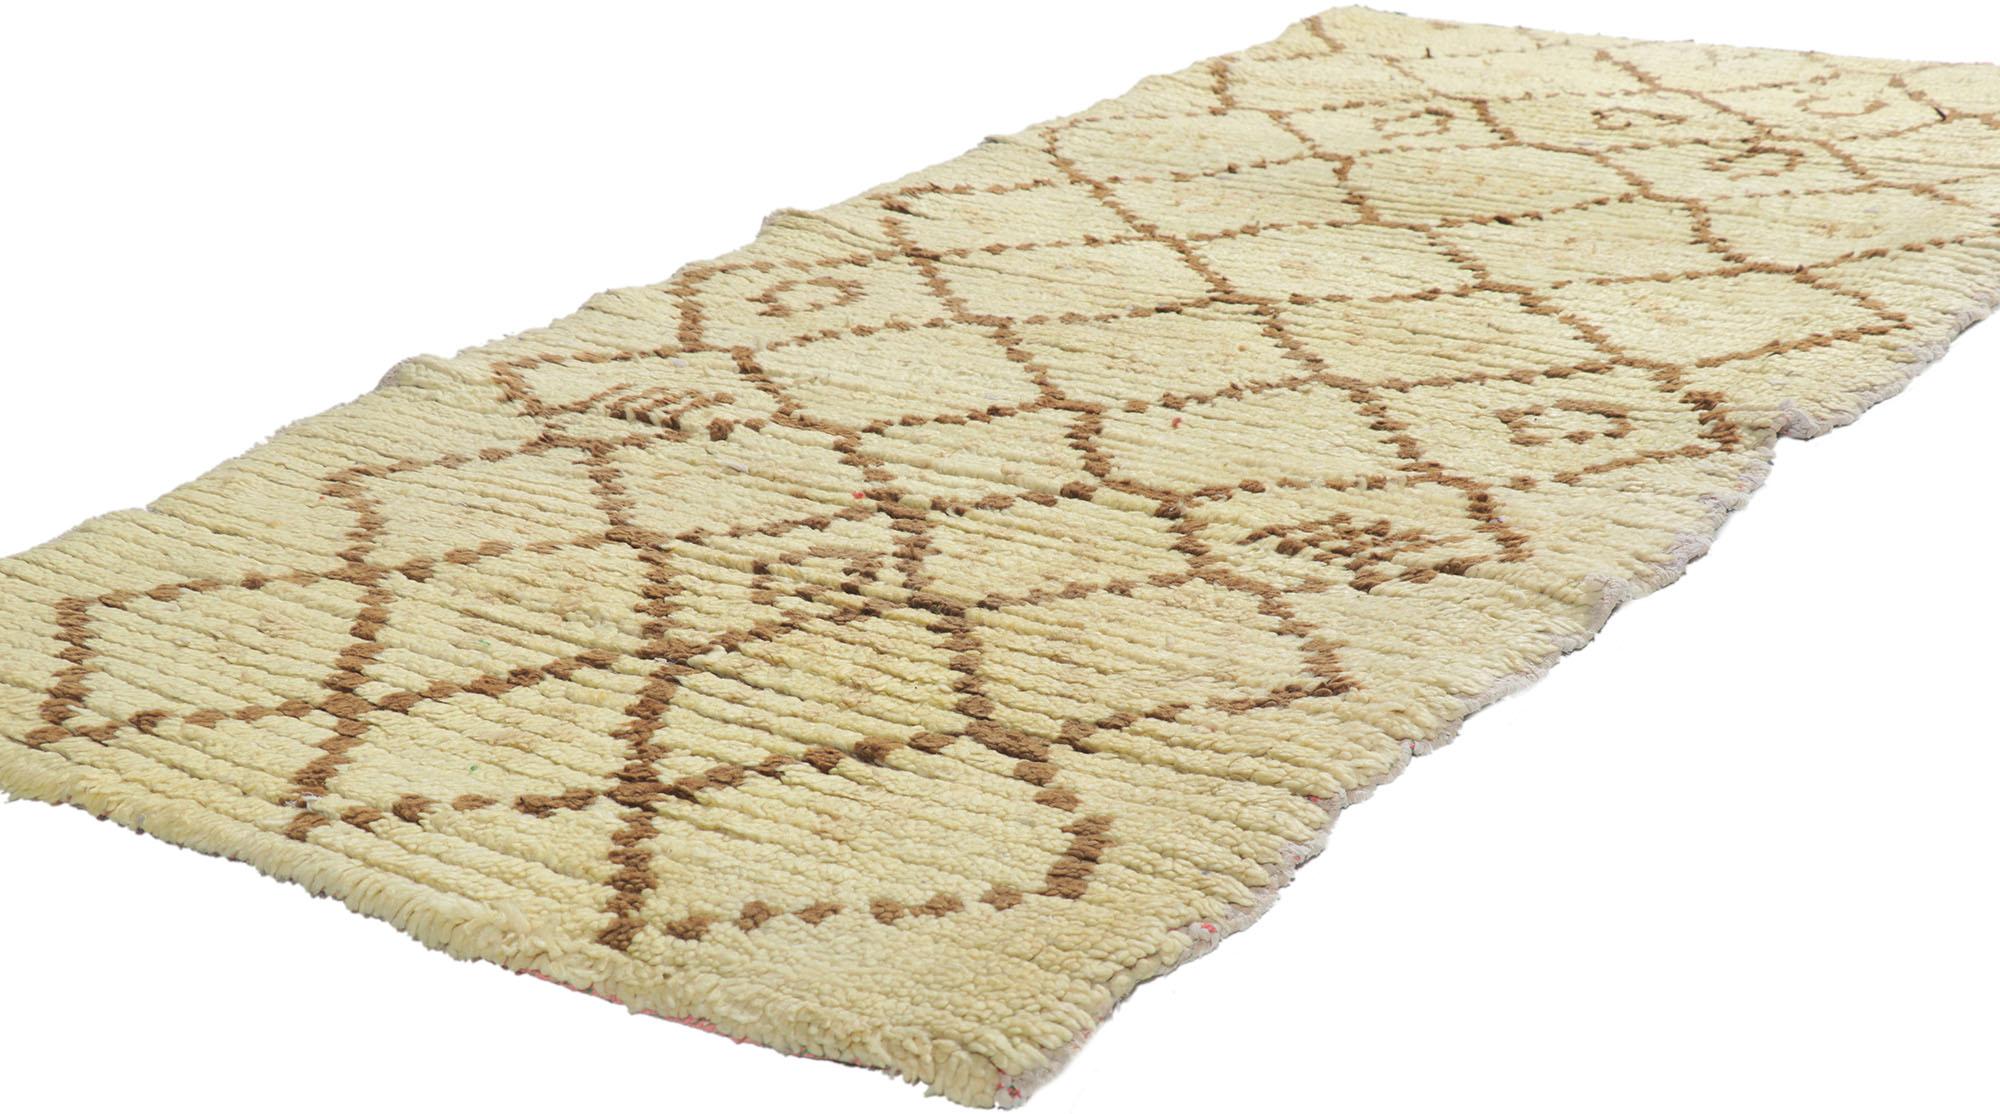 21605 Vintage Moroccan Azilal Rug, 02'11 x 06'04.
Wabi-Sabi meets neutral bohemian in this hand knotted wool vintage Berber Moroccan Azilal rug. The perfectly imperfect lozenge lattice and earthy neutral colors woven into this piece work together